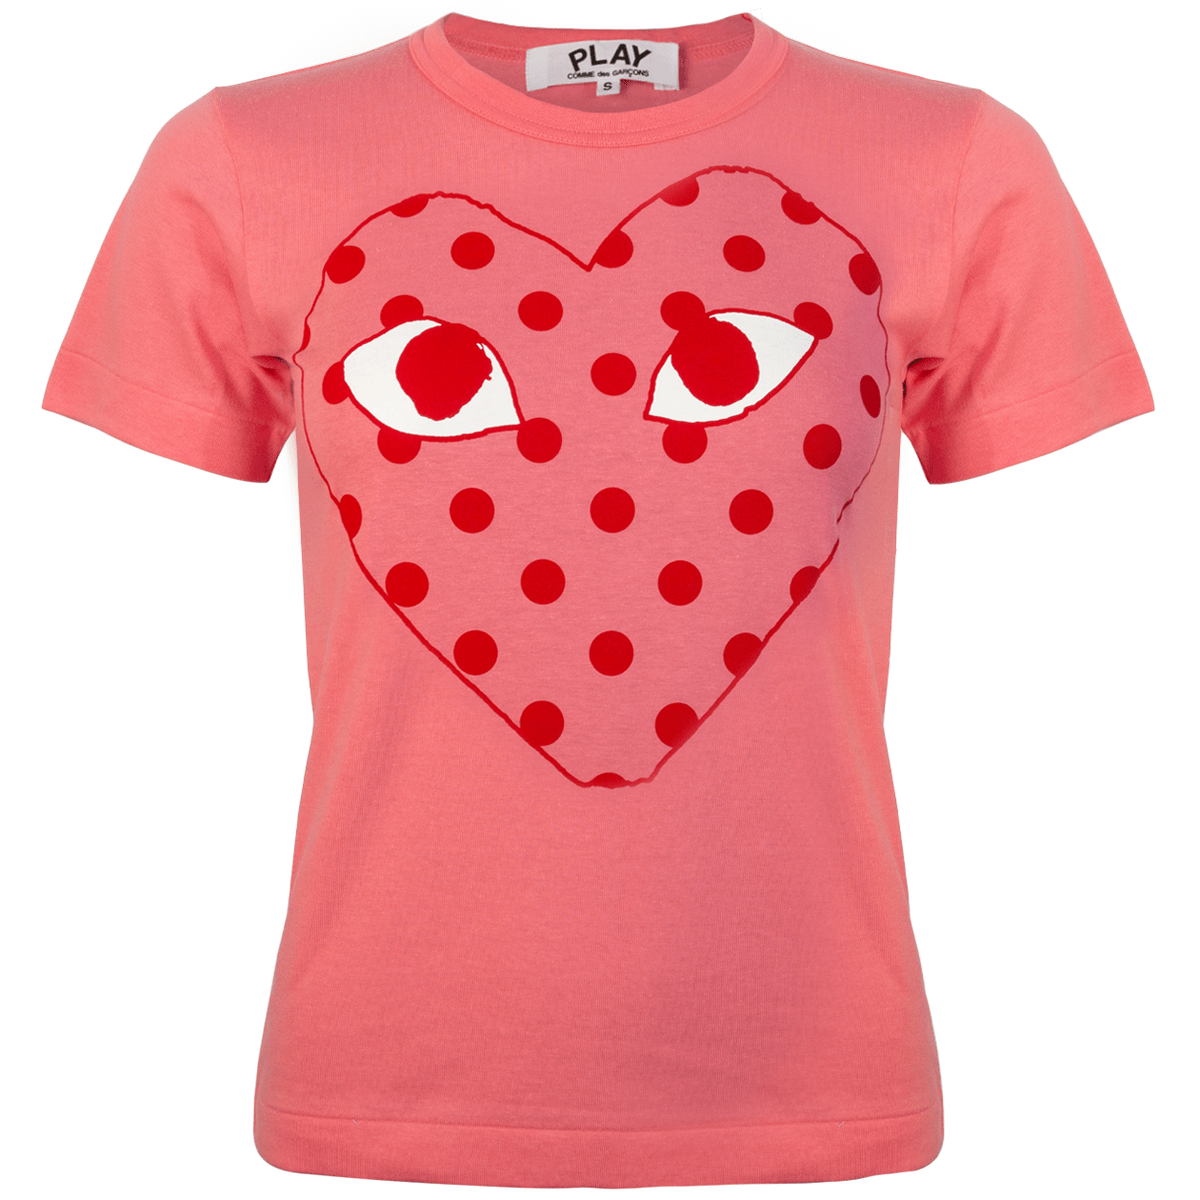 T275 Bright Spotted Heart Logo T-shirt Pink L Rose